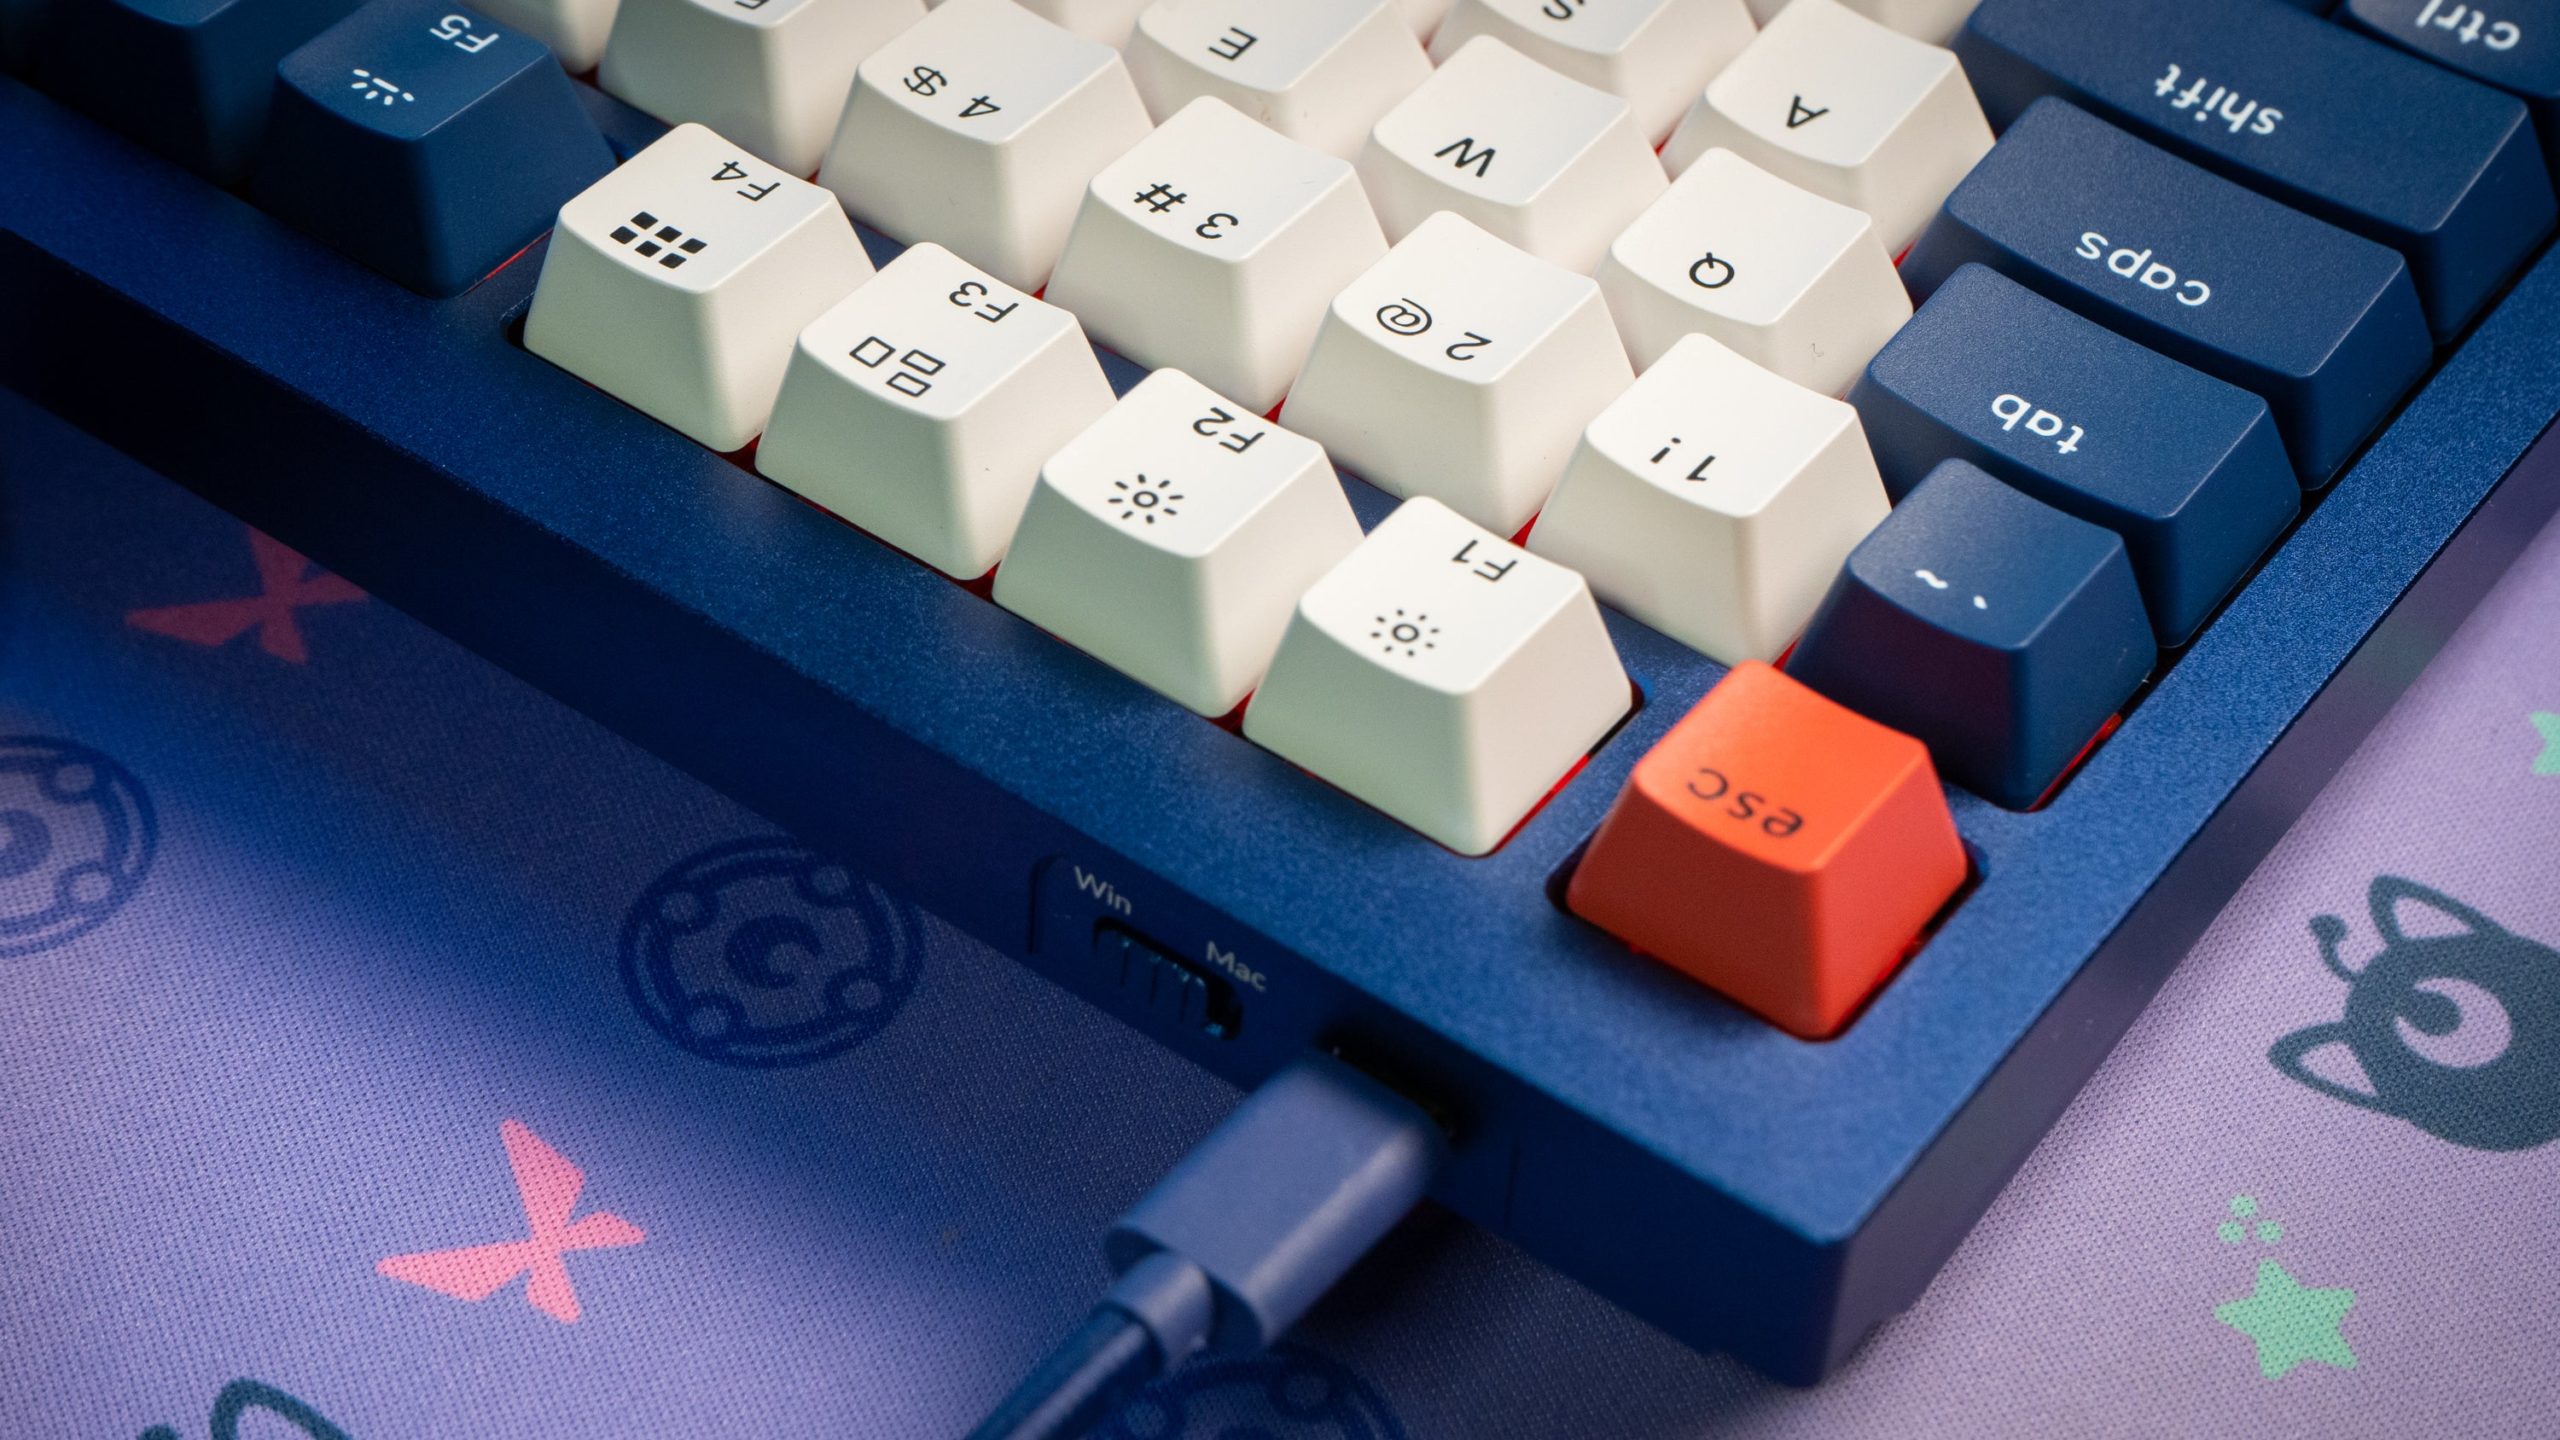 Keychron’s Q1 Is the Perfect Introduction to Mechanical Keyboard Modding